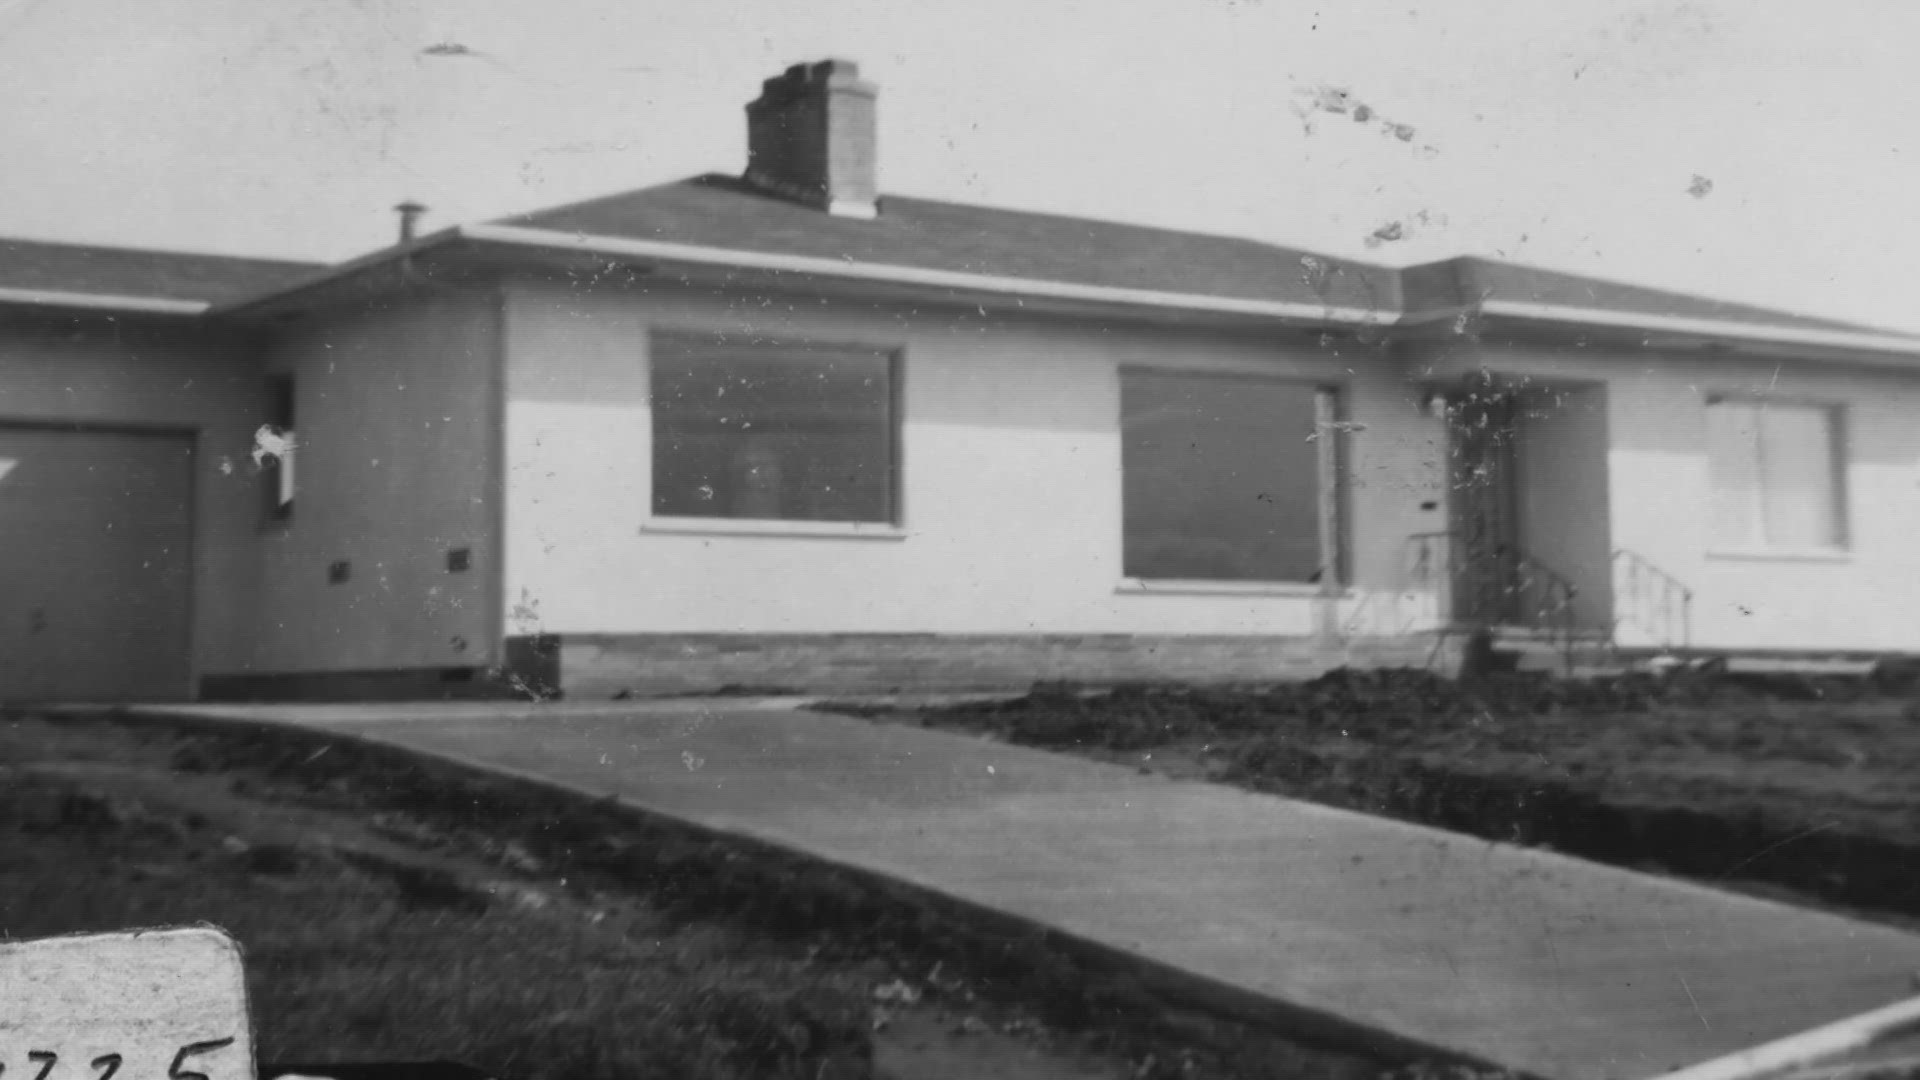 For decades in the 1900s developers were allowed to restrict neighborhoods to only white residents. See the full story on KING 5 News, tonight at 6:30 and 11:00 PM